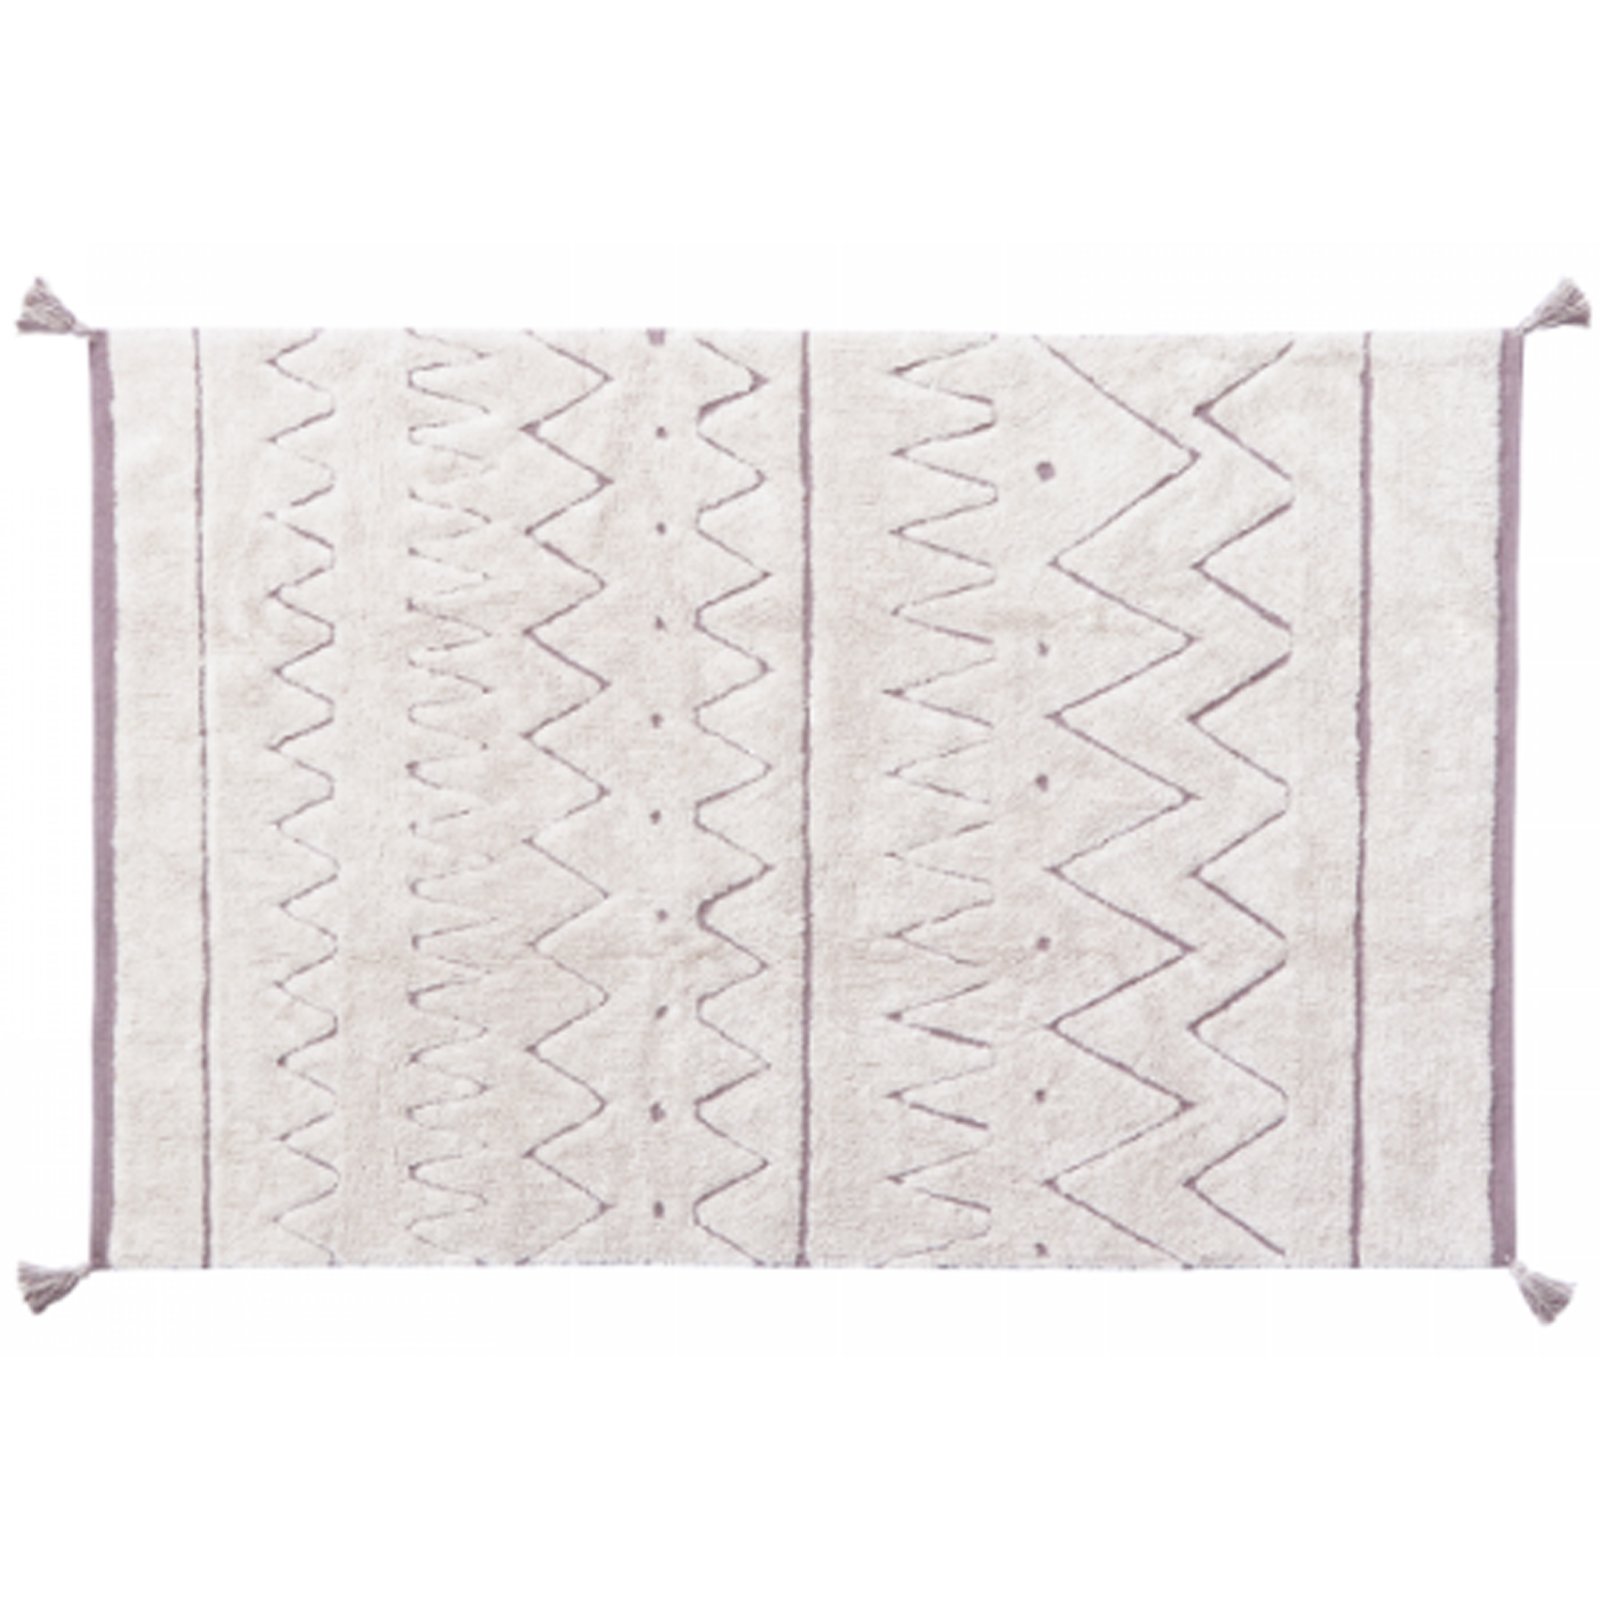 Tapete RugCycled Azteca M 140 x 200 cm - Lorena Canals